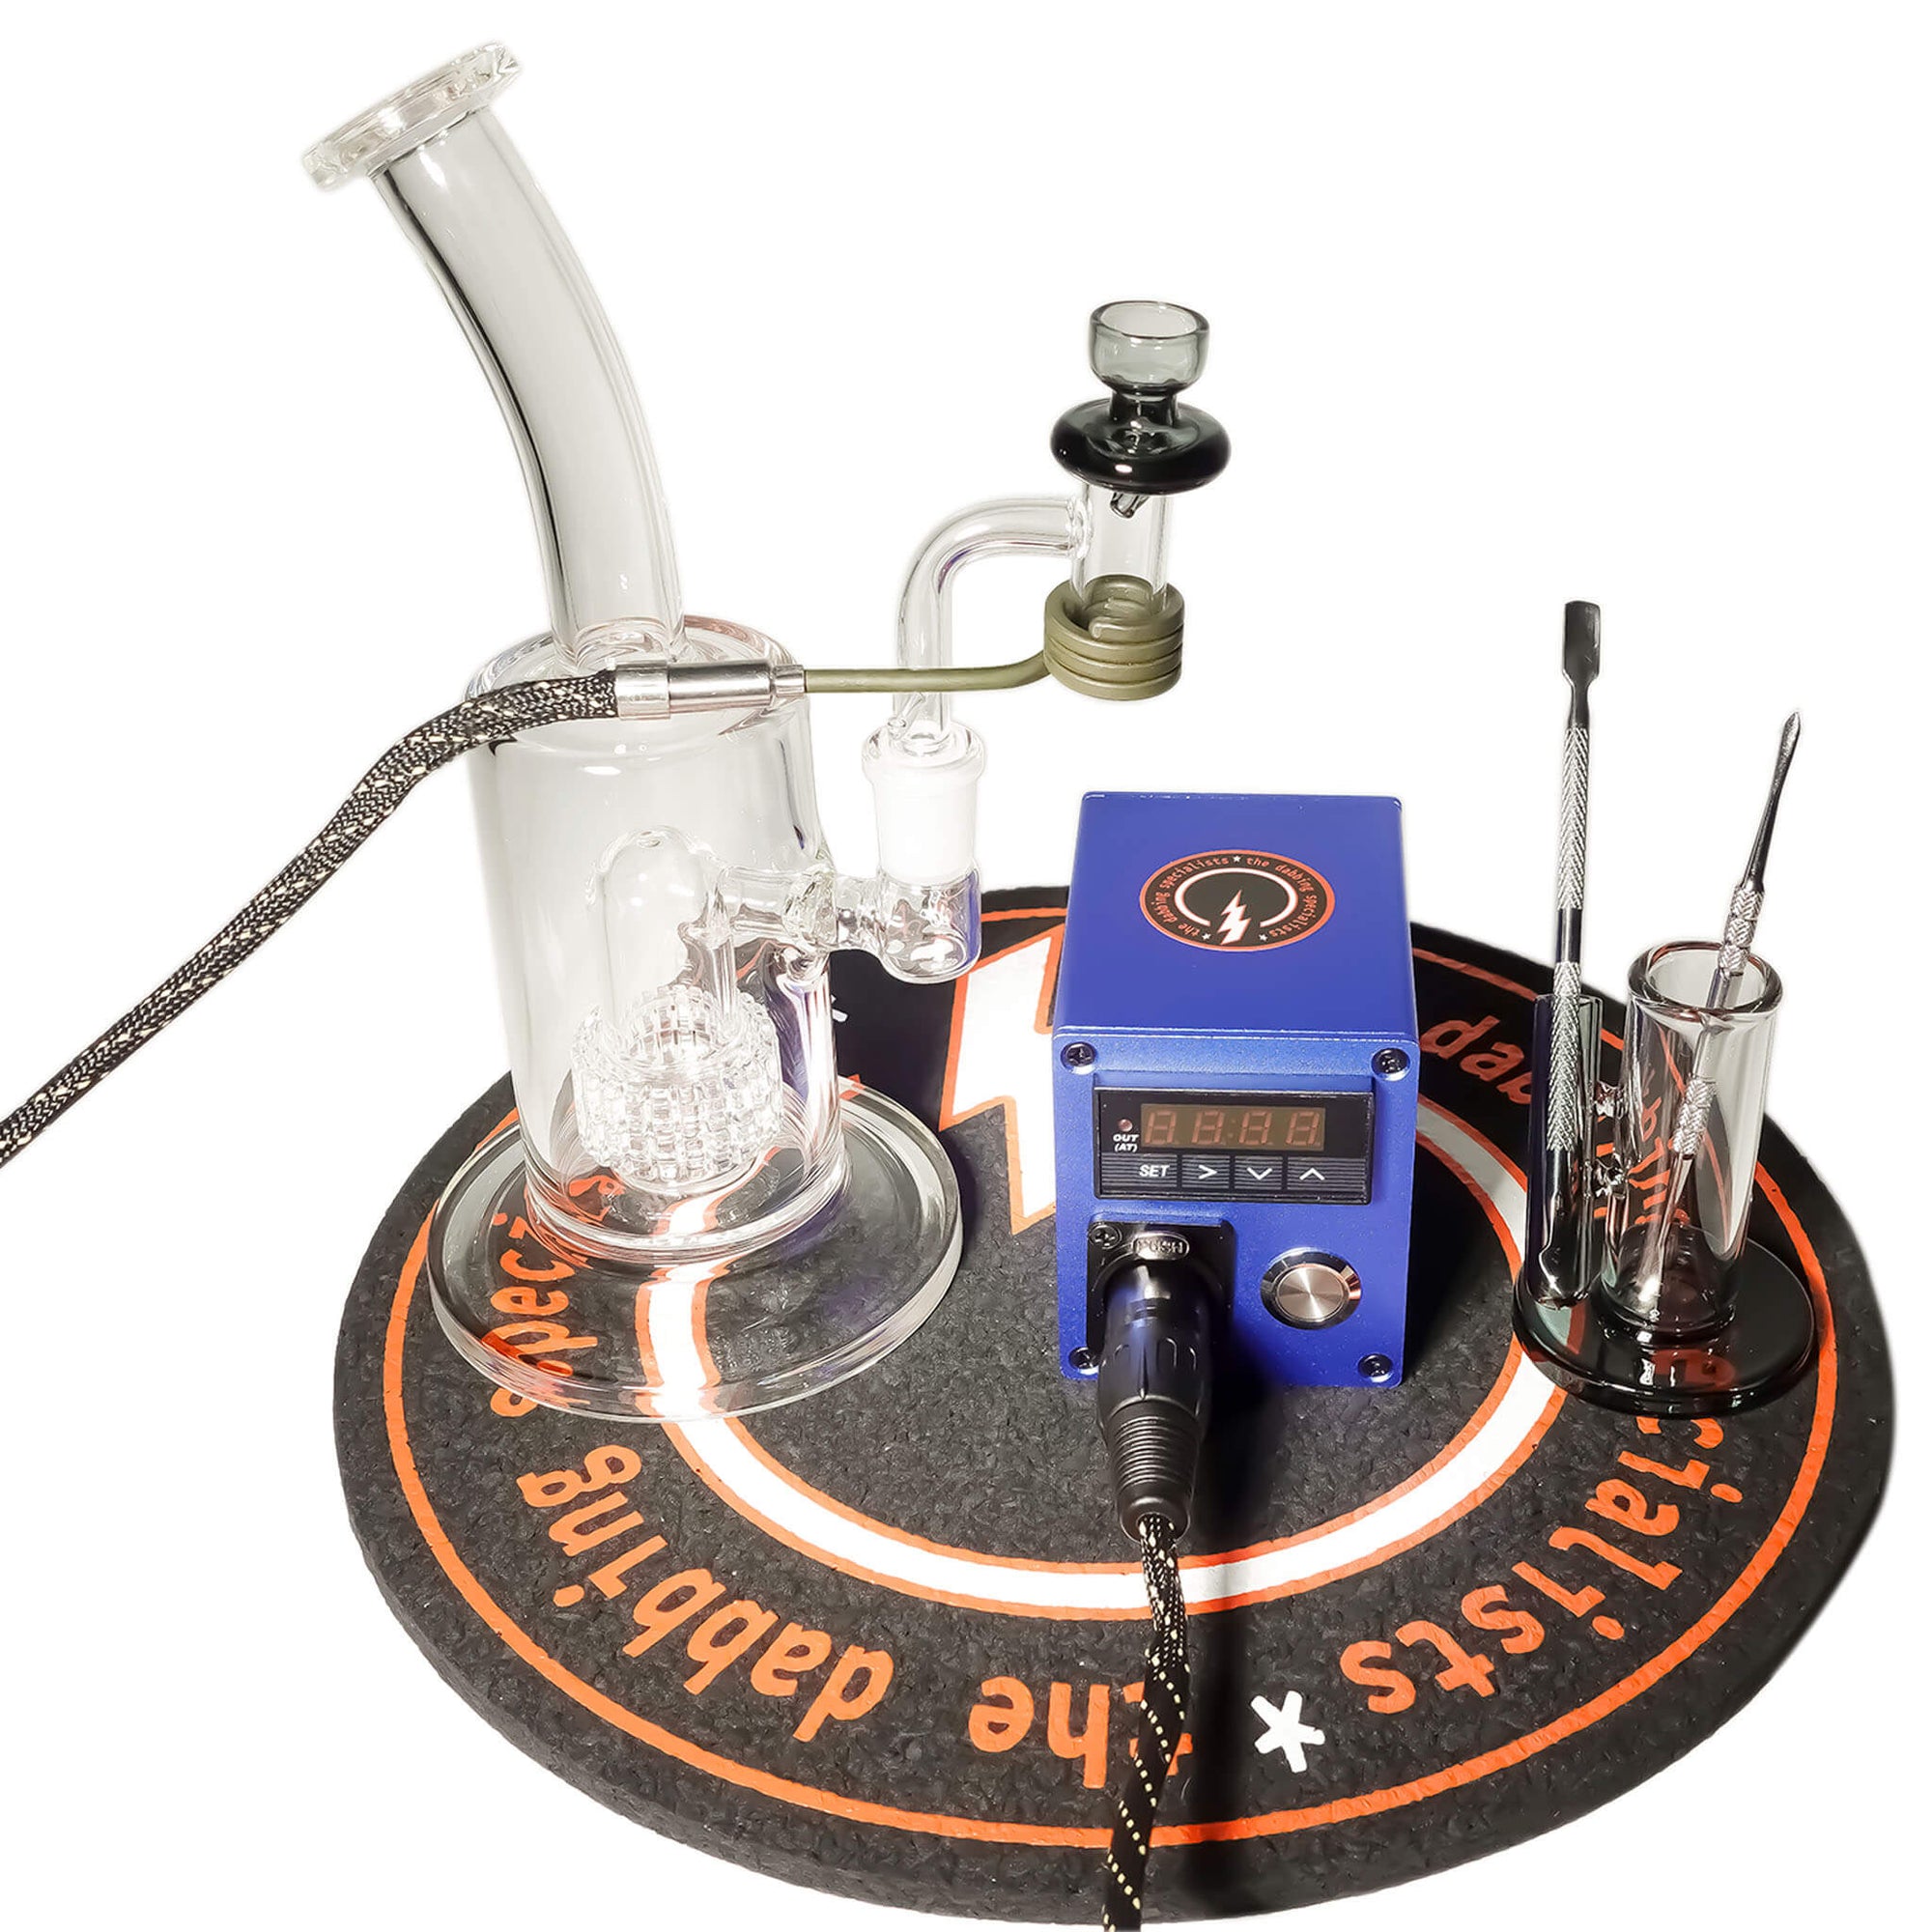 Commander 16mm E-Banger Deluxe Enail Kit | Blue Finish View | the dabbing specialists